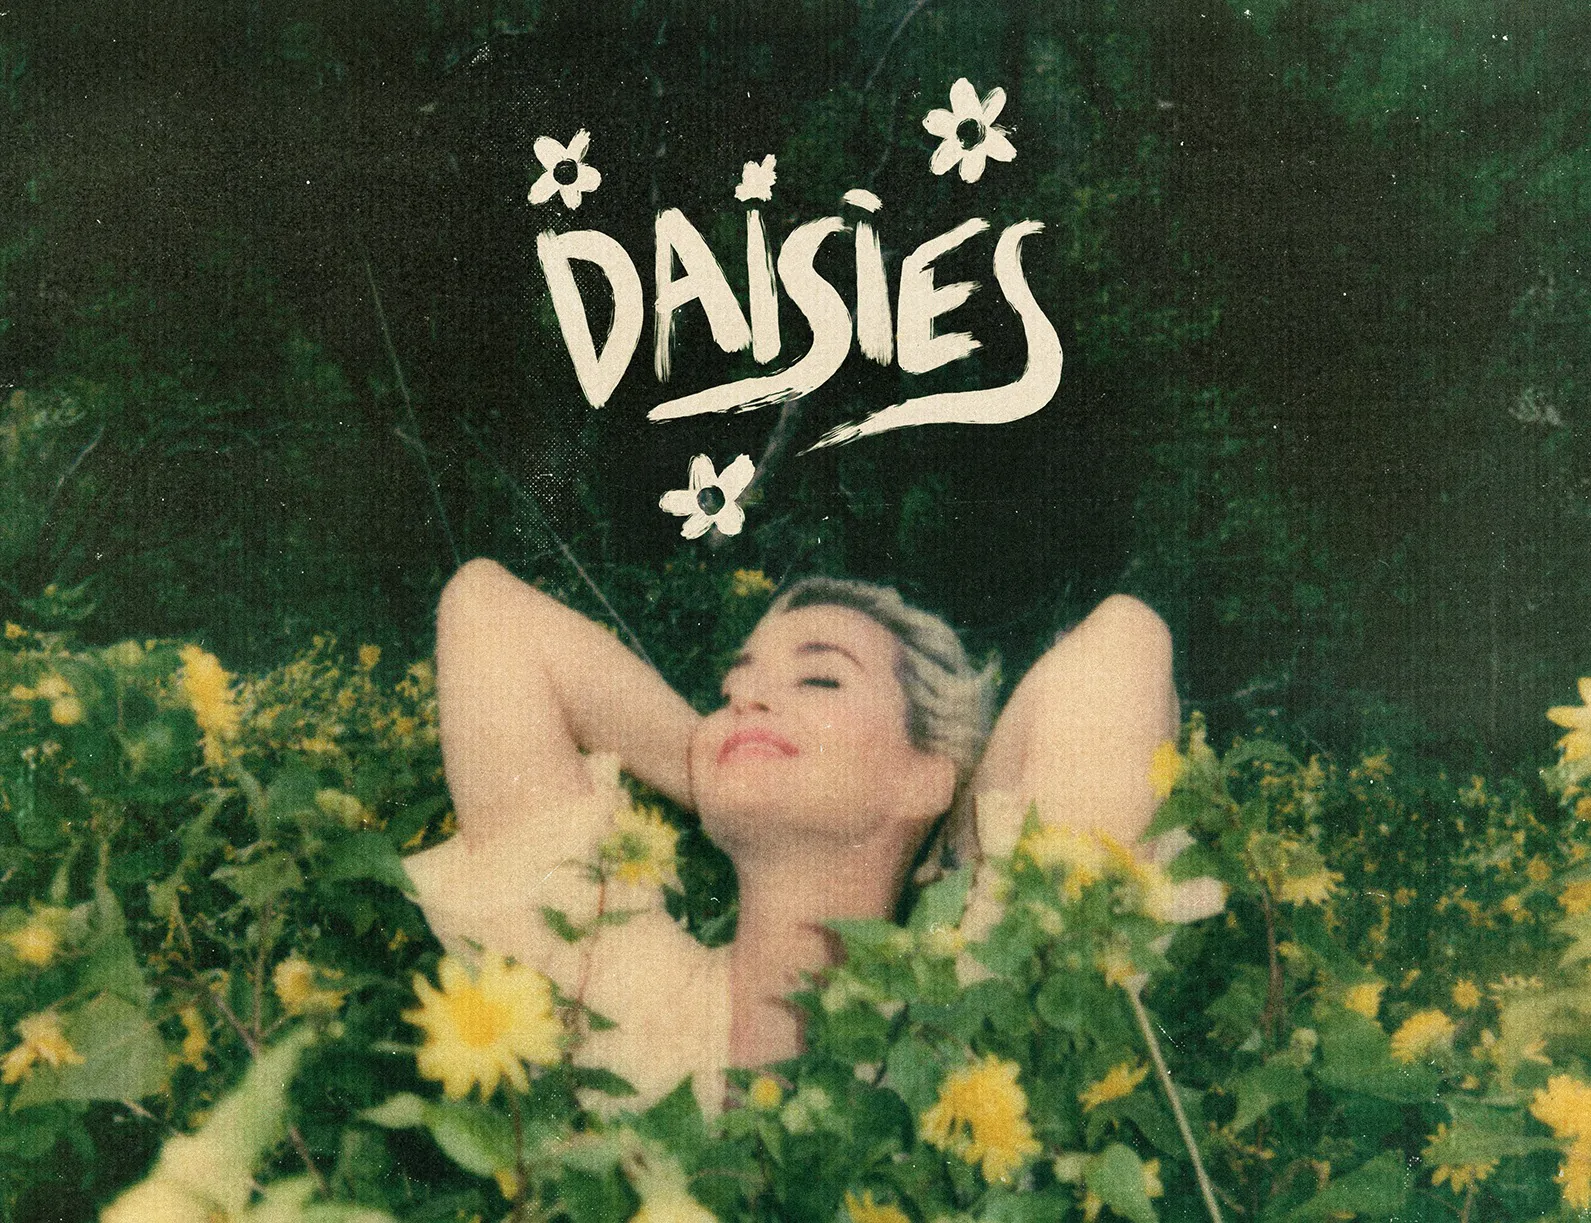 KATY PERRY launches new album with new track ‘Daisies’ – Watch Video